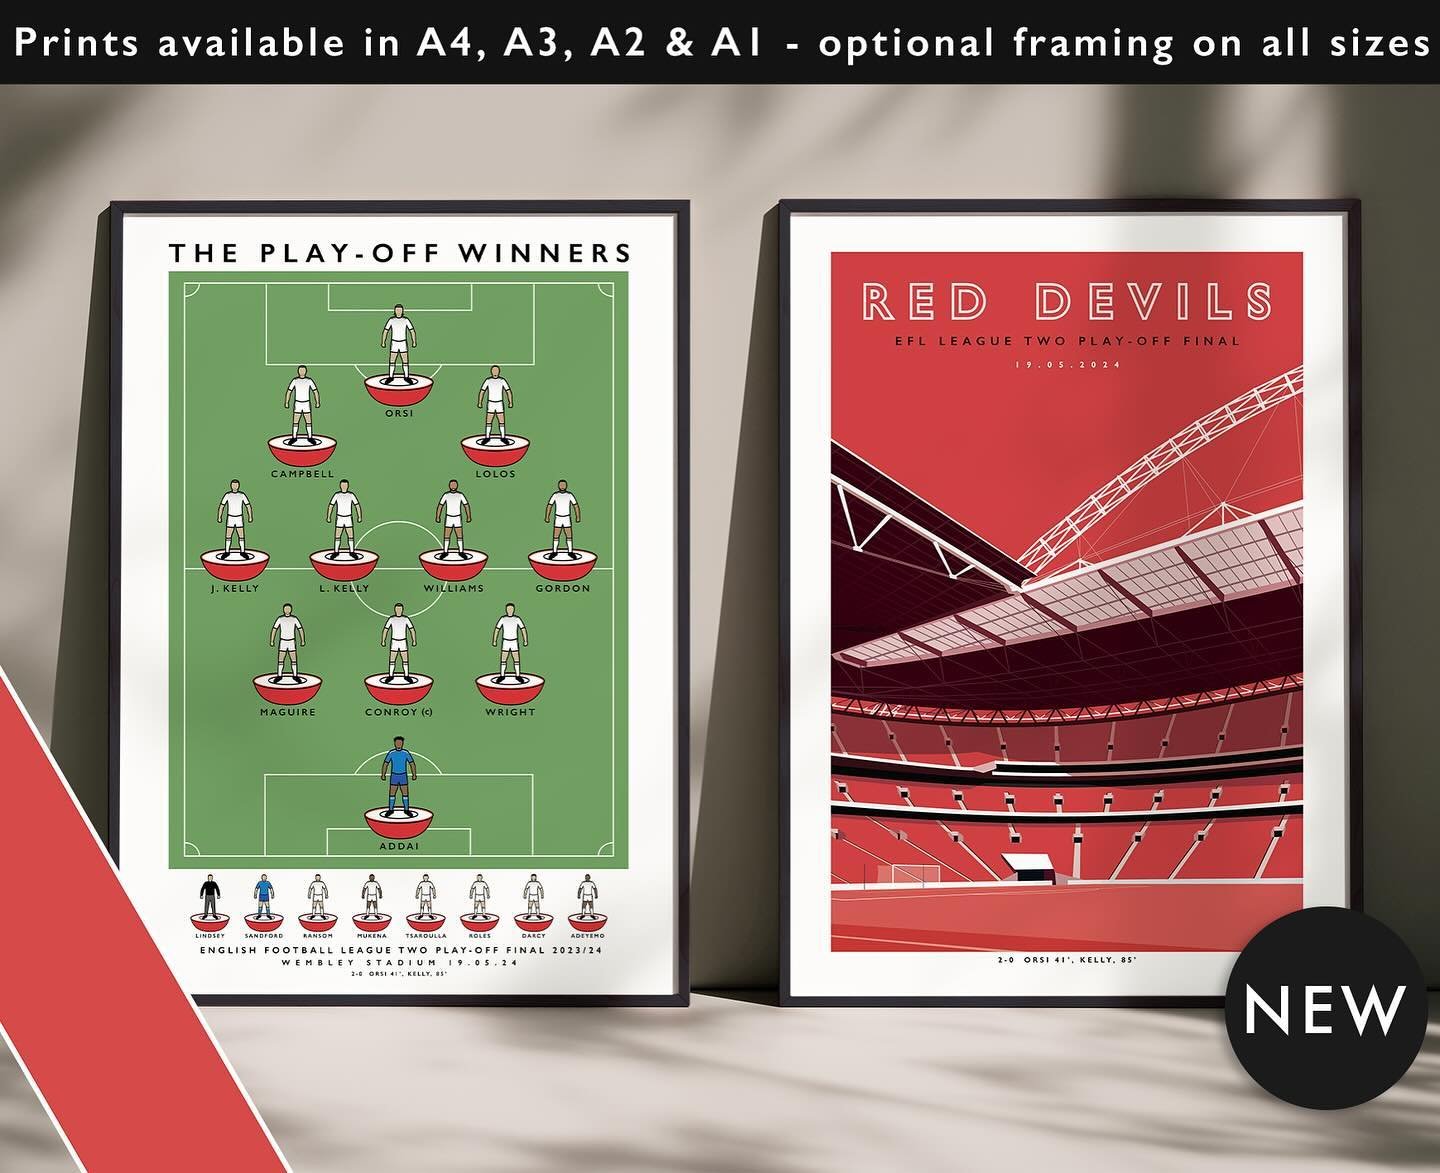 NEW: Crawley Town Play-Off Winners 23/24 &amp; Red Devils Wembley 

Get 10% off until midnight with the discount code
RED-DEVILS 

Shop now: matthewjiwood.com/subbuteo-xis/c&hellip;

Prints available in A4, A3, A2 &amp; A1 with optional framing

#Cra